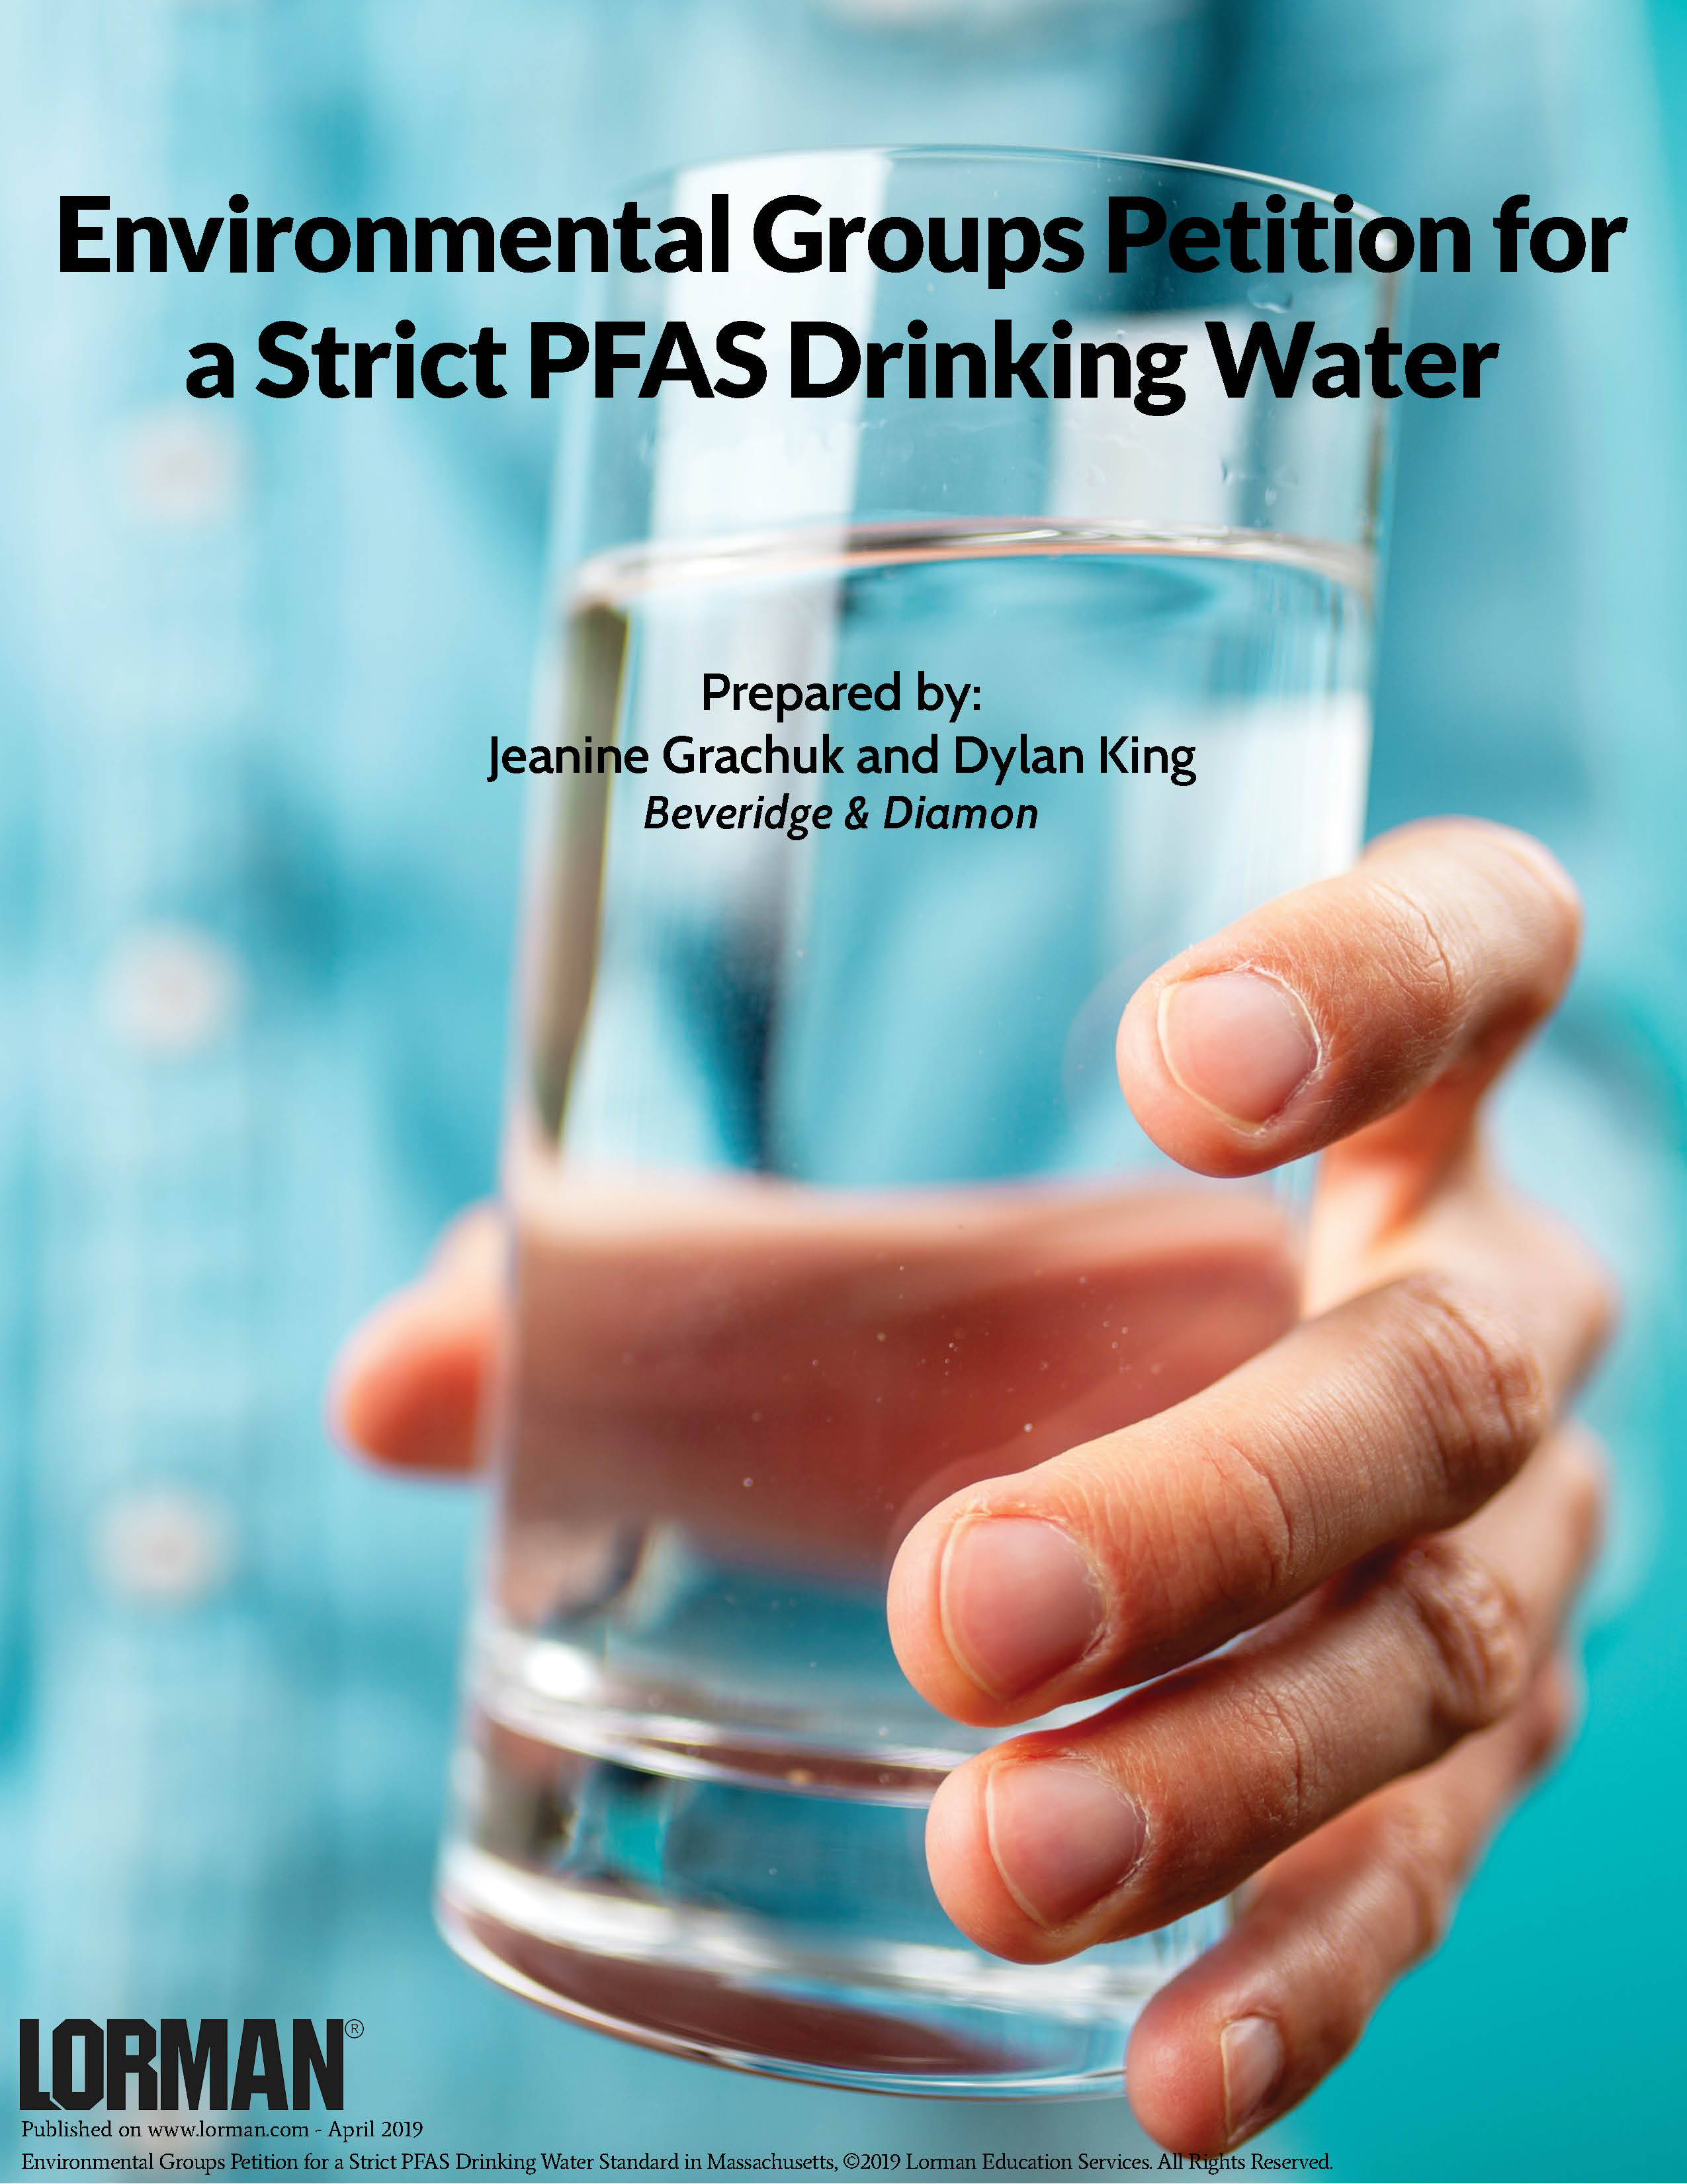 Environmental Groups Petition for a Strict PFAS Drinking Water